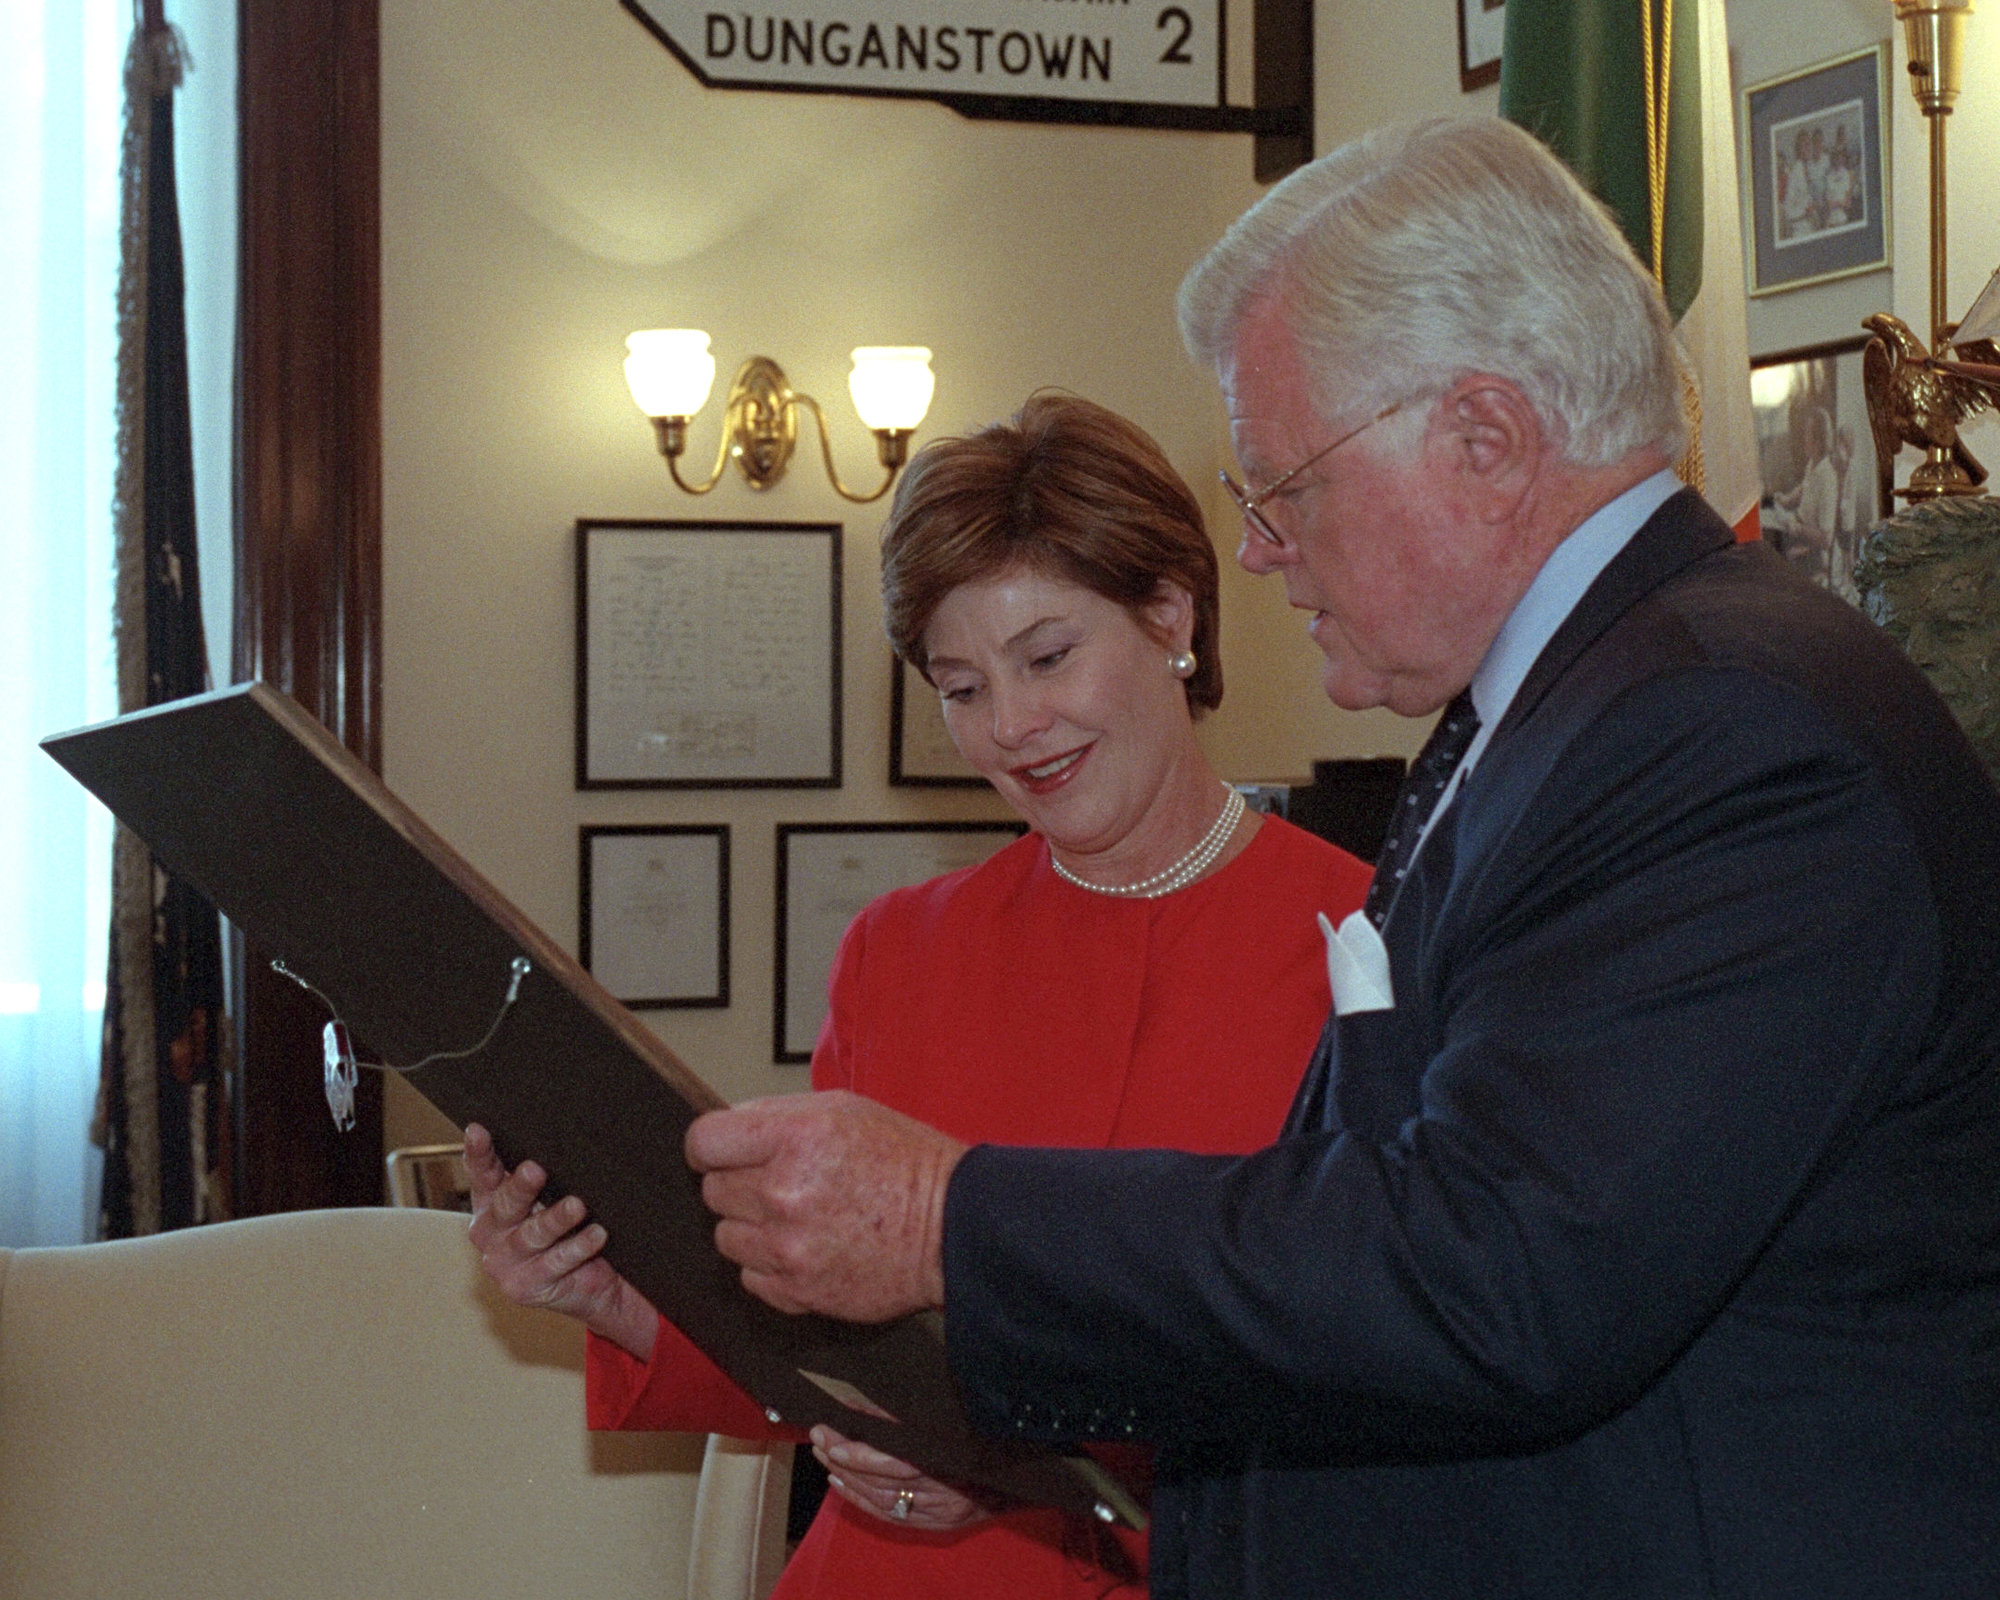 Senator Ted Kennedy shows Mrs. Laura Bush art and memorabilia in his office at the Russell Senate Office Building, September 11, 2001.